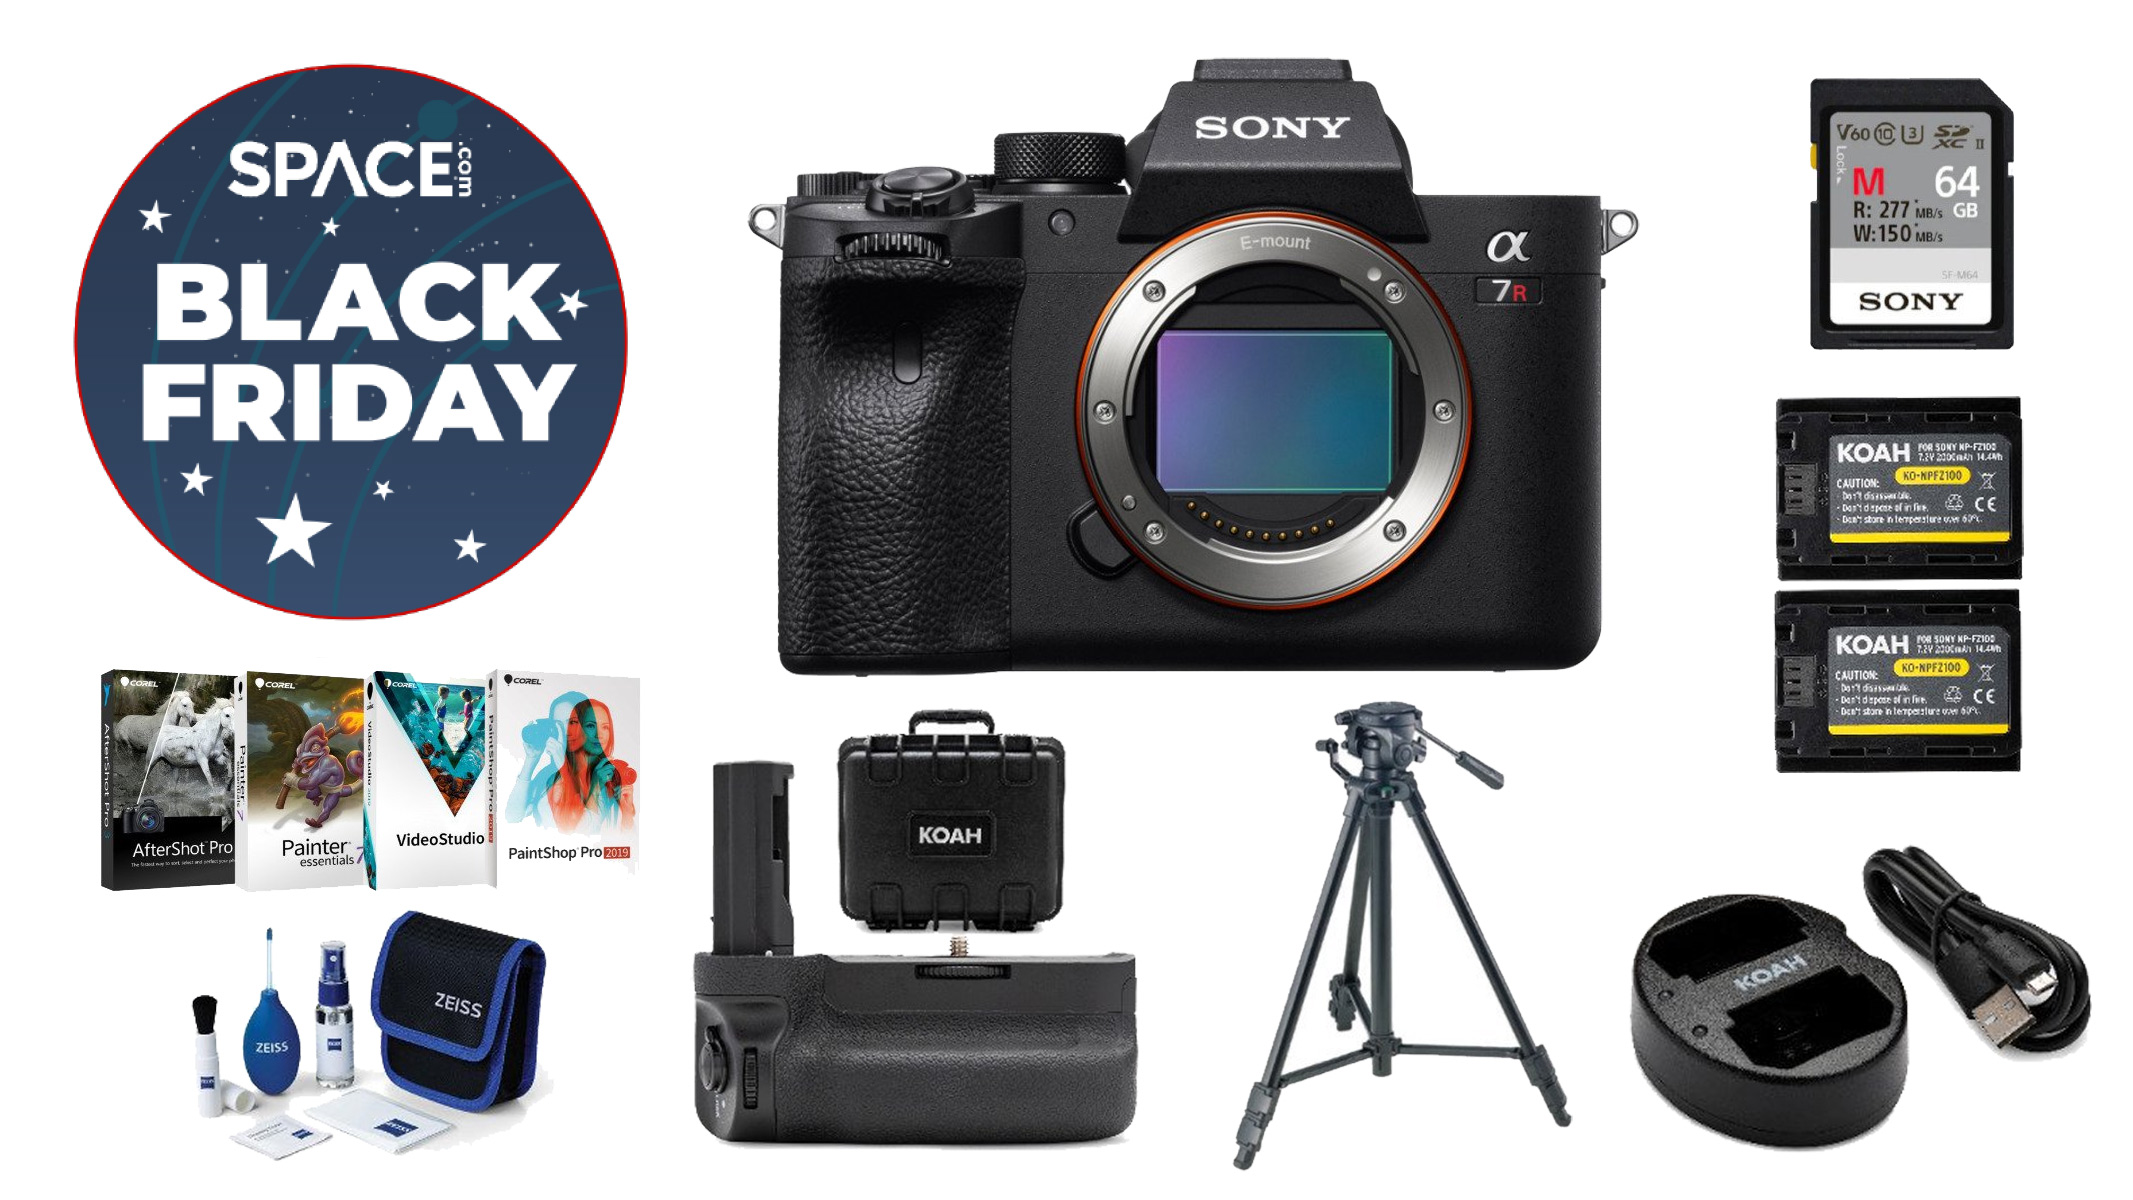 Charotar Globe Daily View of Sony A7R IVA accessory bundle on a white background with black friday deal badge